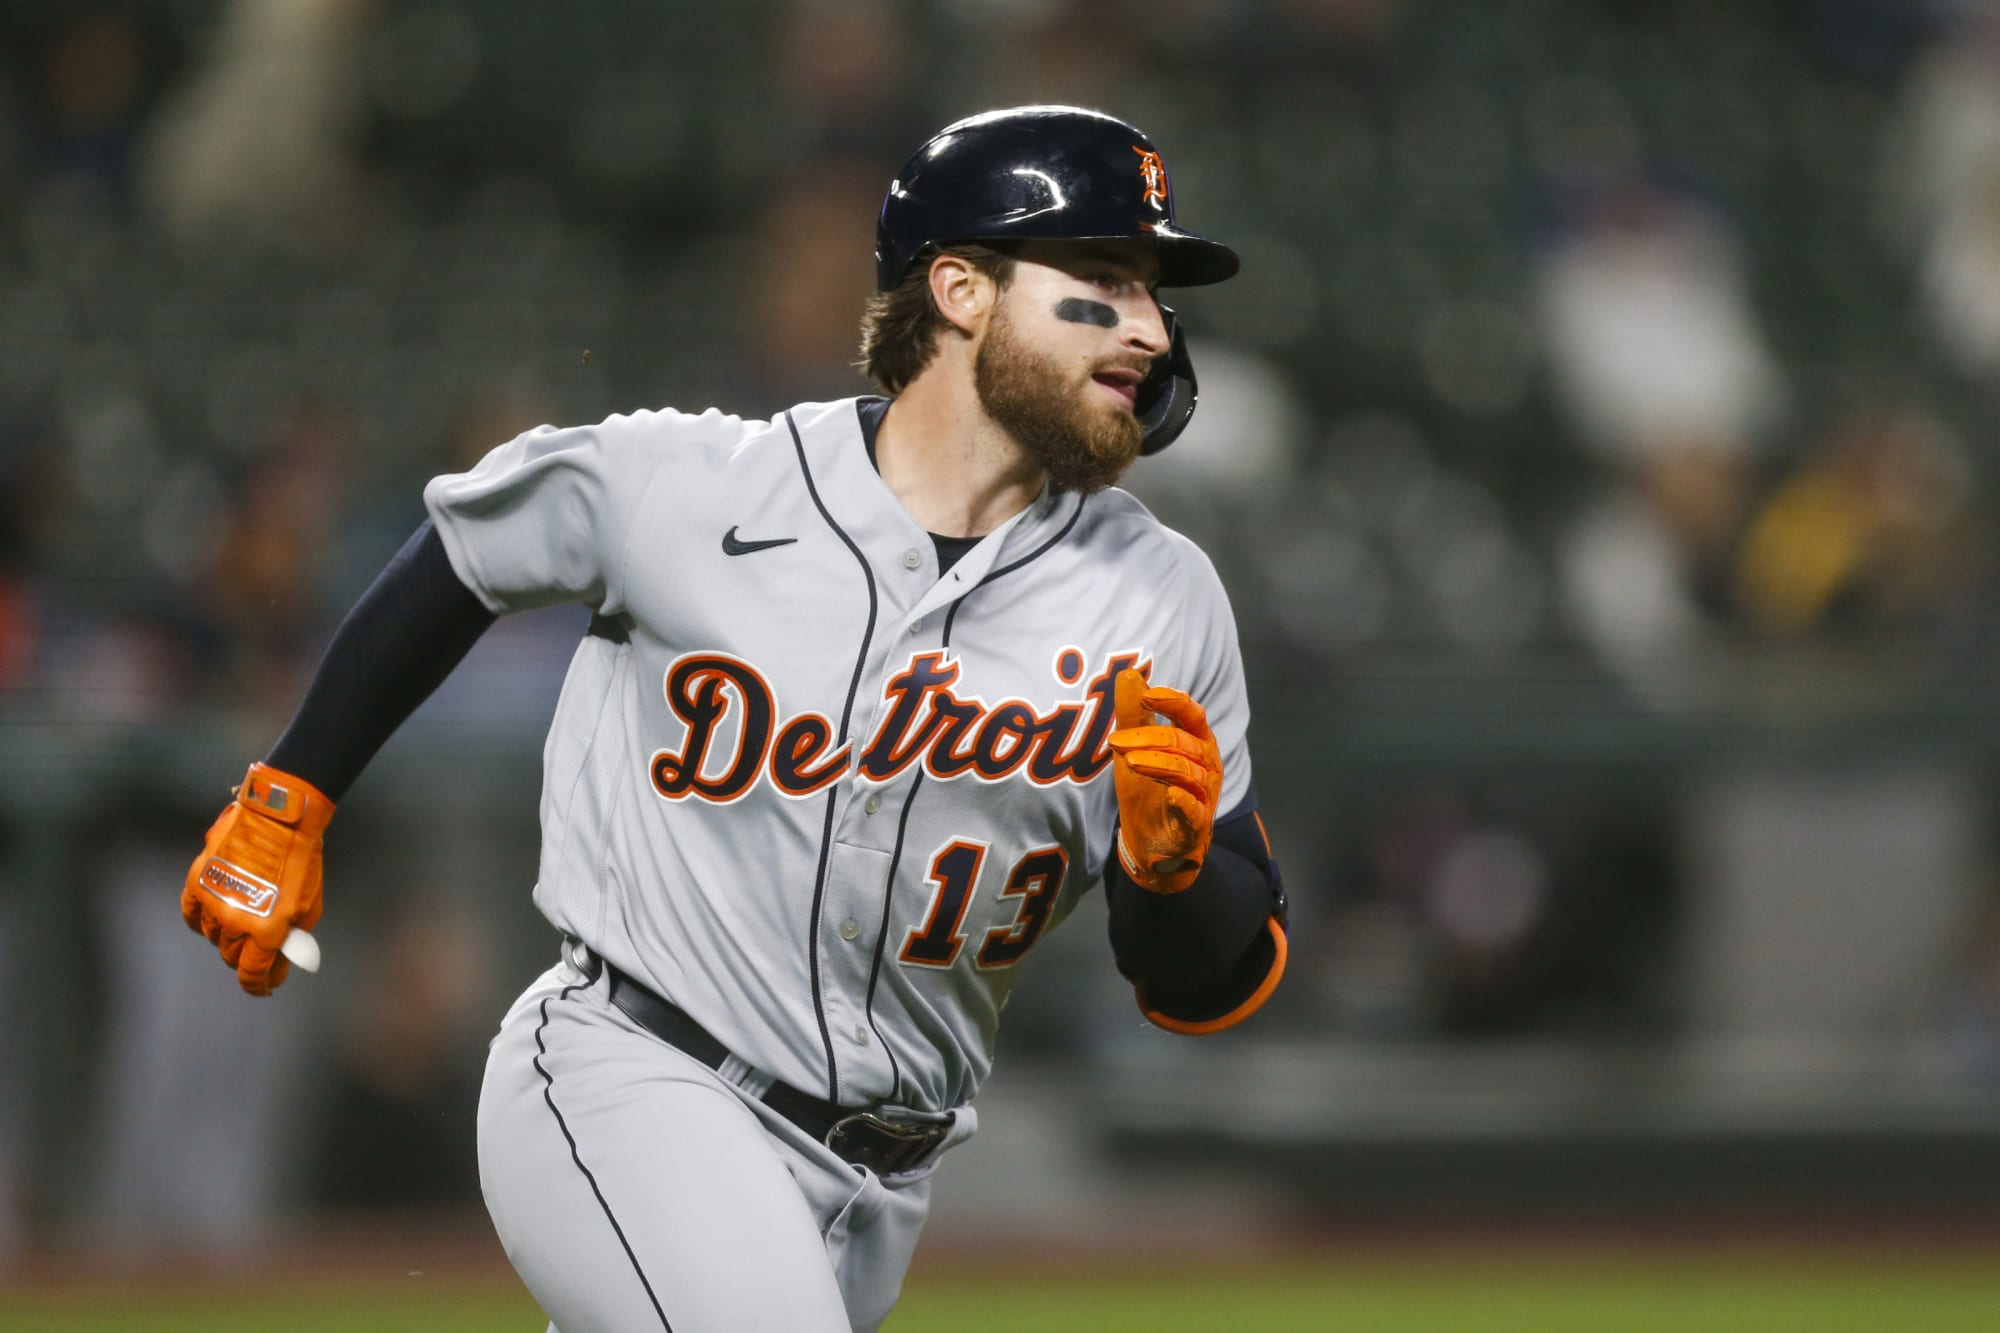 Eric Haase's homer gives Detroit Tigers lead in unlikely fashion